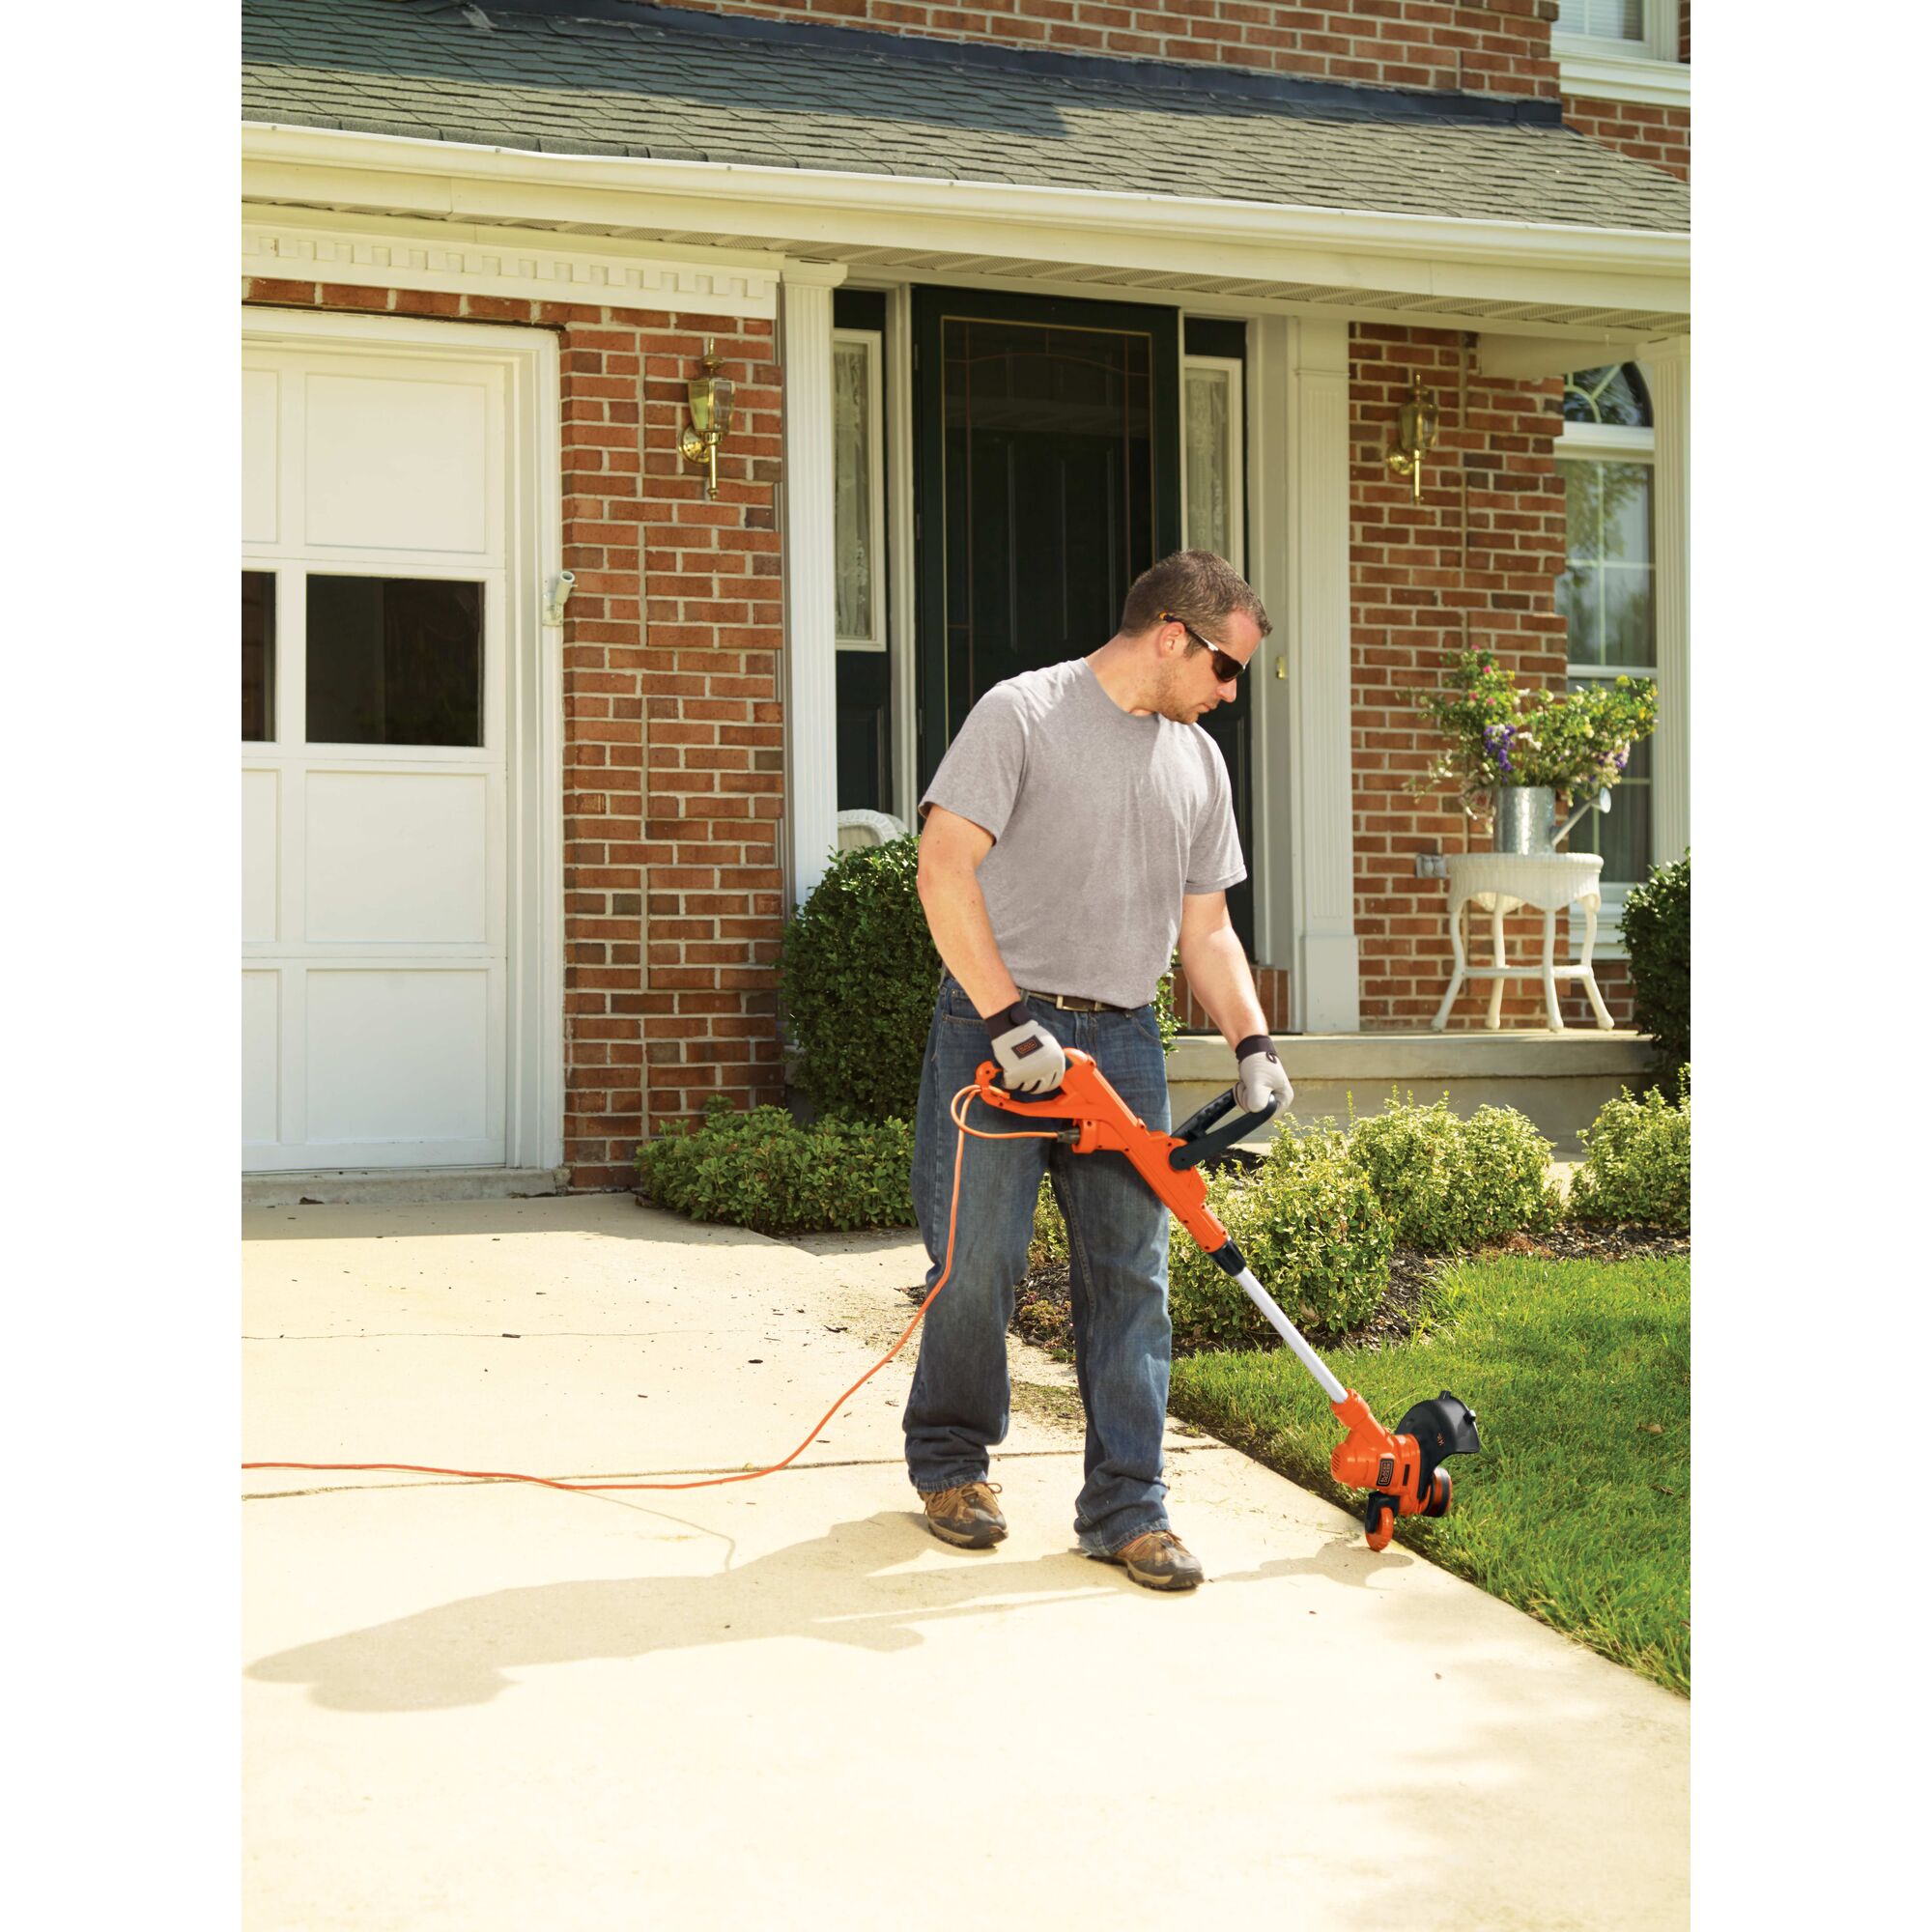 6.5 Ampere 14 inch trimmer edger being used by a person to trim grass.